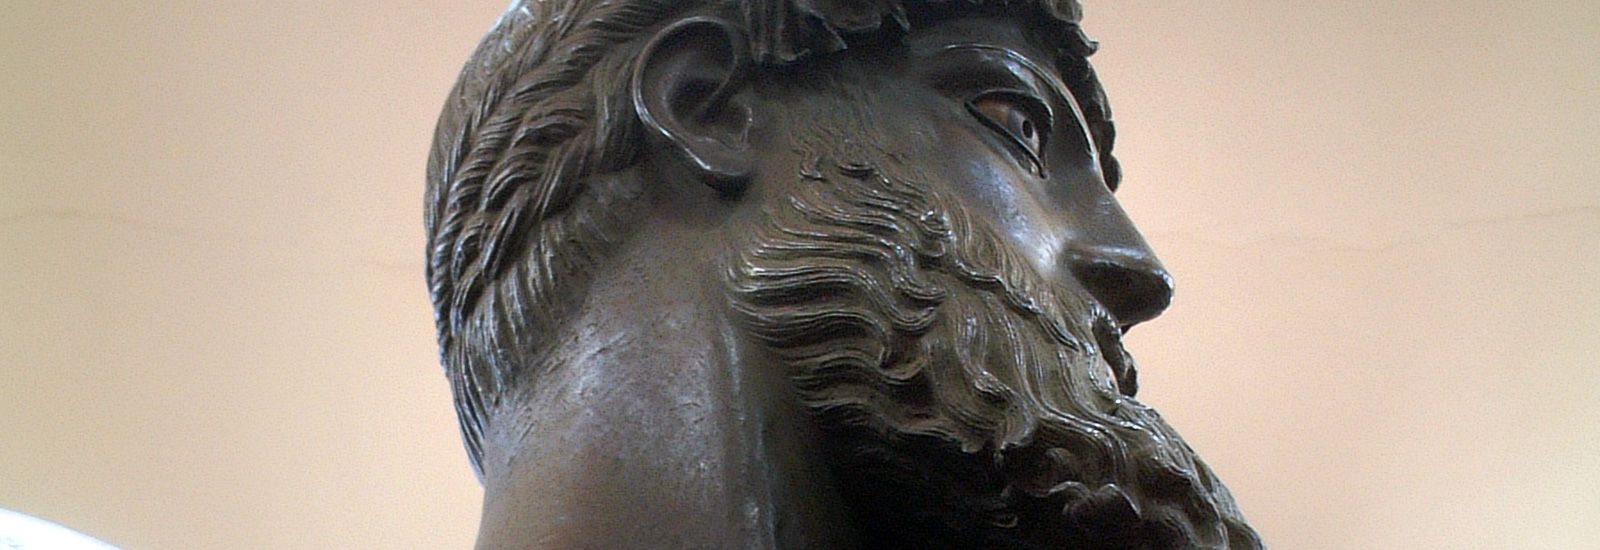 Close up of the head of a bronze statue